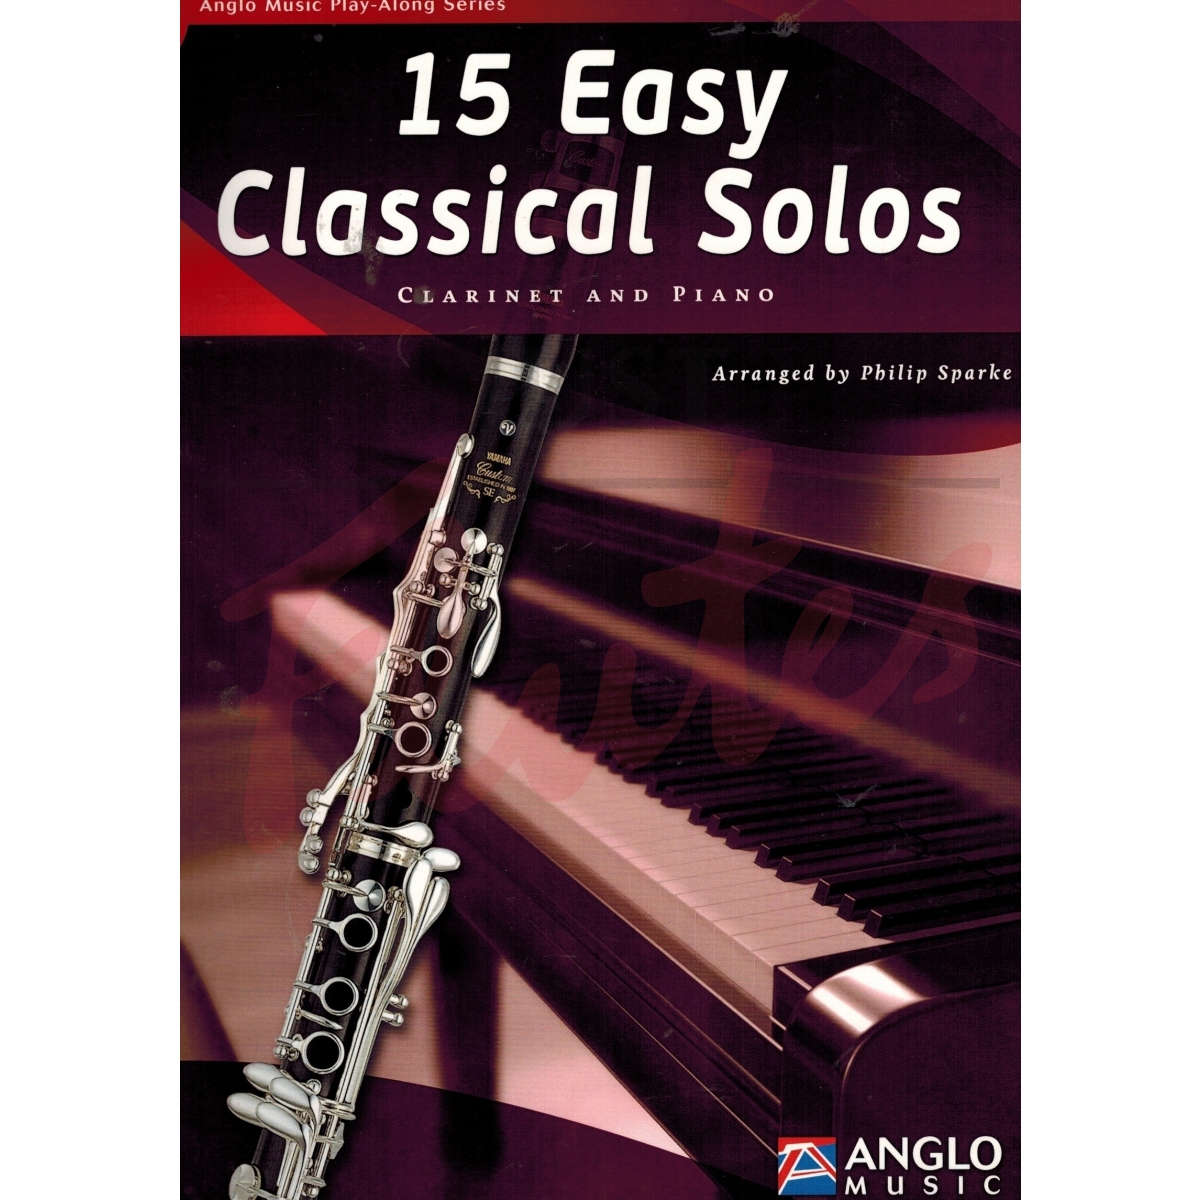 15 Easy Classical Solos [Clarinet]